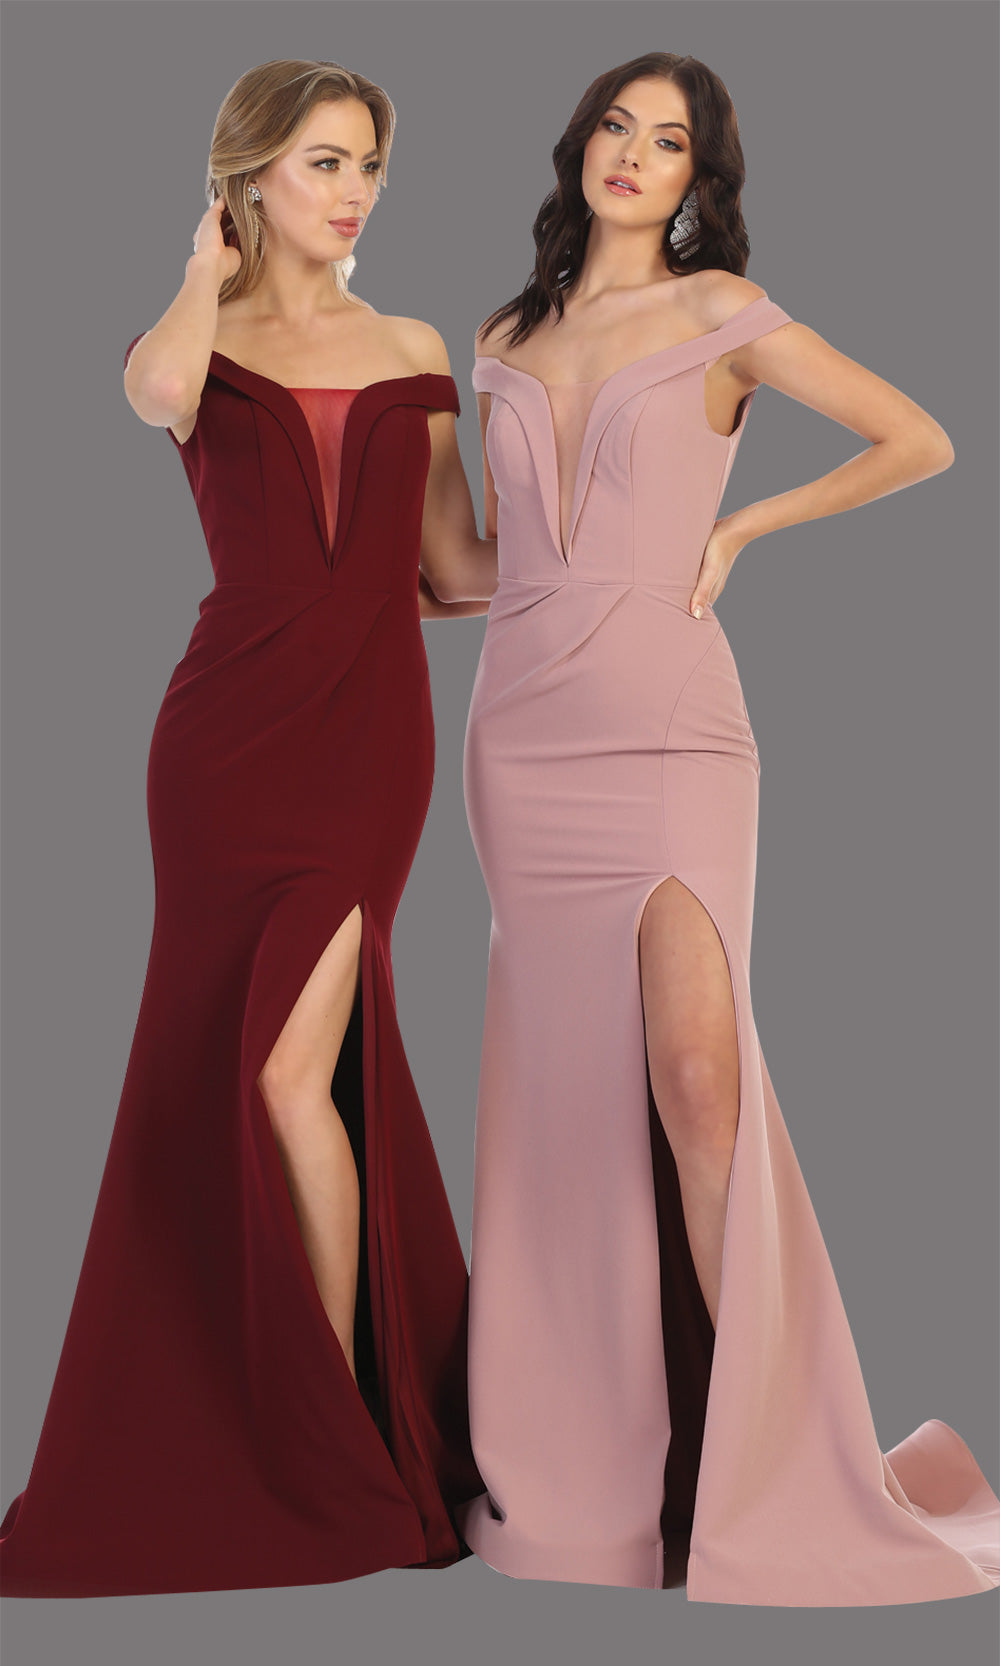 Mayqueen MQ1748 long burgund red fitted sleek & sexy off shoulder dress w/ high slit. This dark red dress is perfect for bridesmaid dresses, simple wedding guest dress, prom dress, gala, black tie wedding. Plus sizes are available, evening party dress.jpg